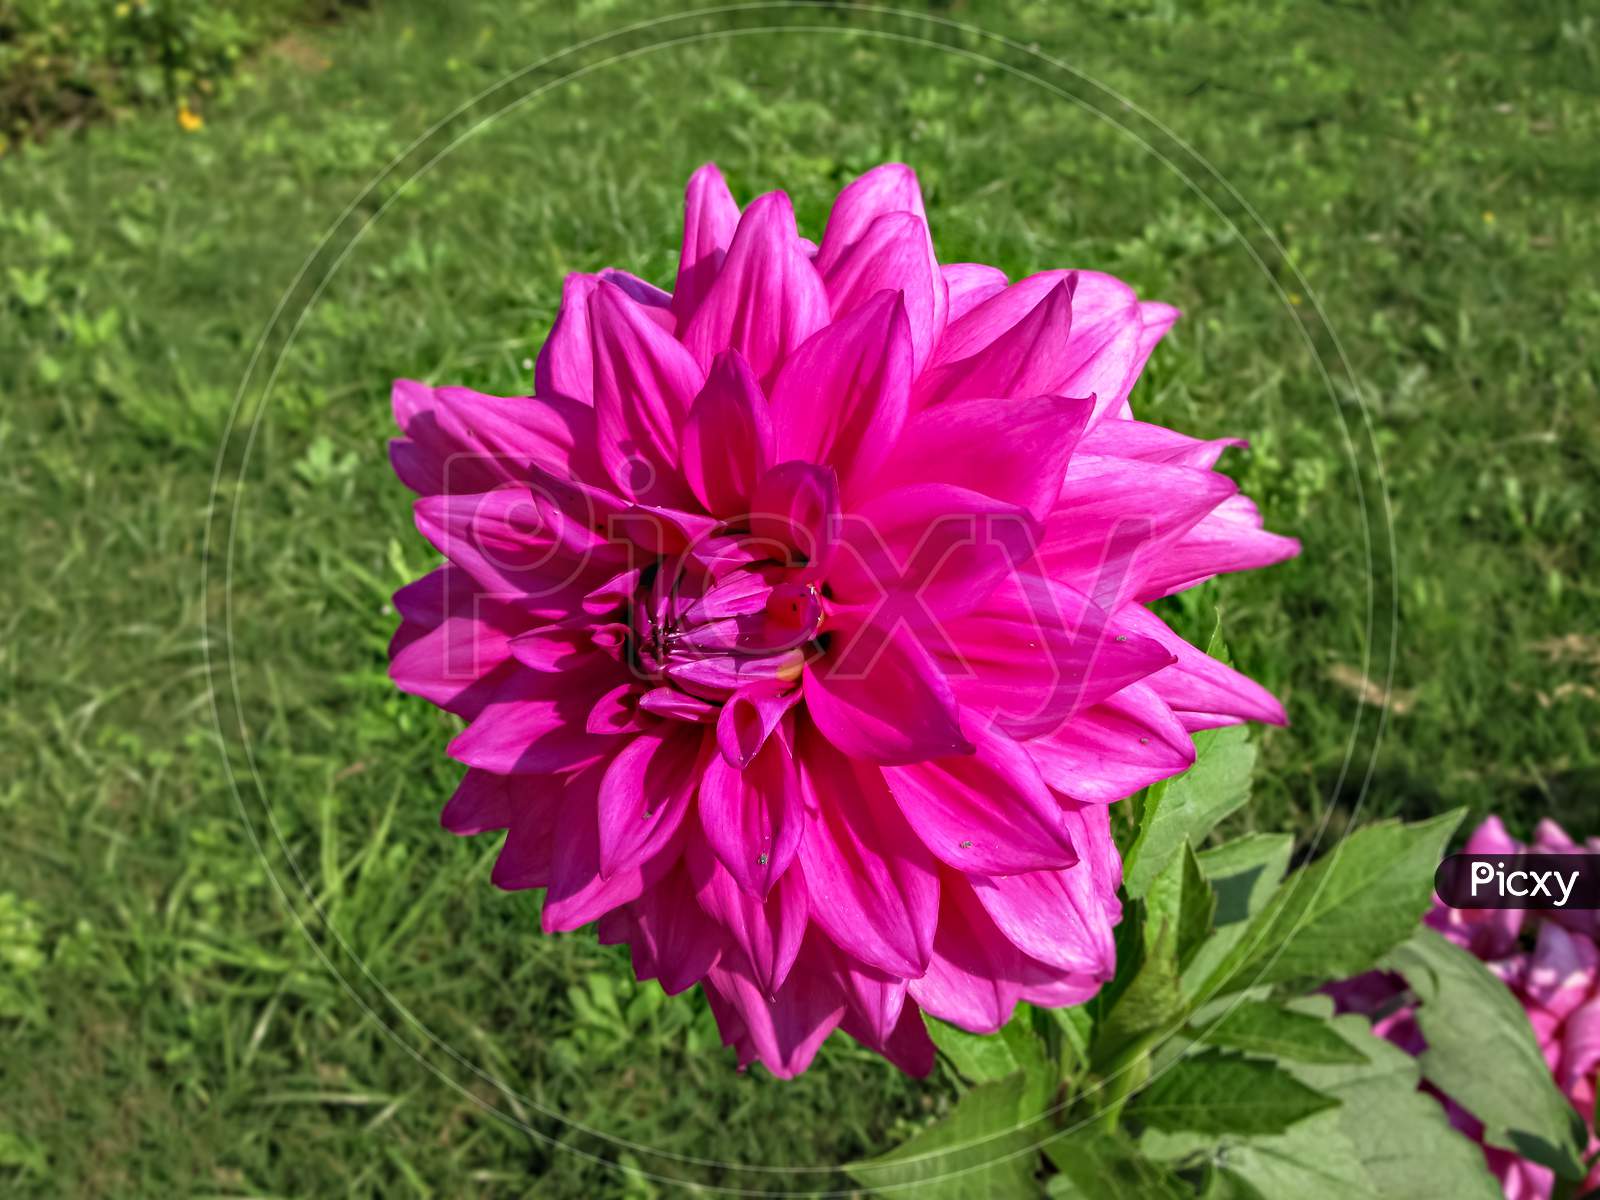 Selective Focus, Blur Background, Close Up Of Bright Pink Dahlia Flower In Park.